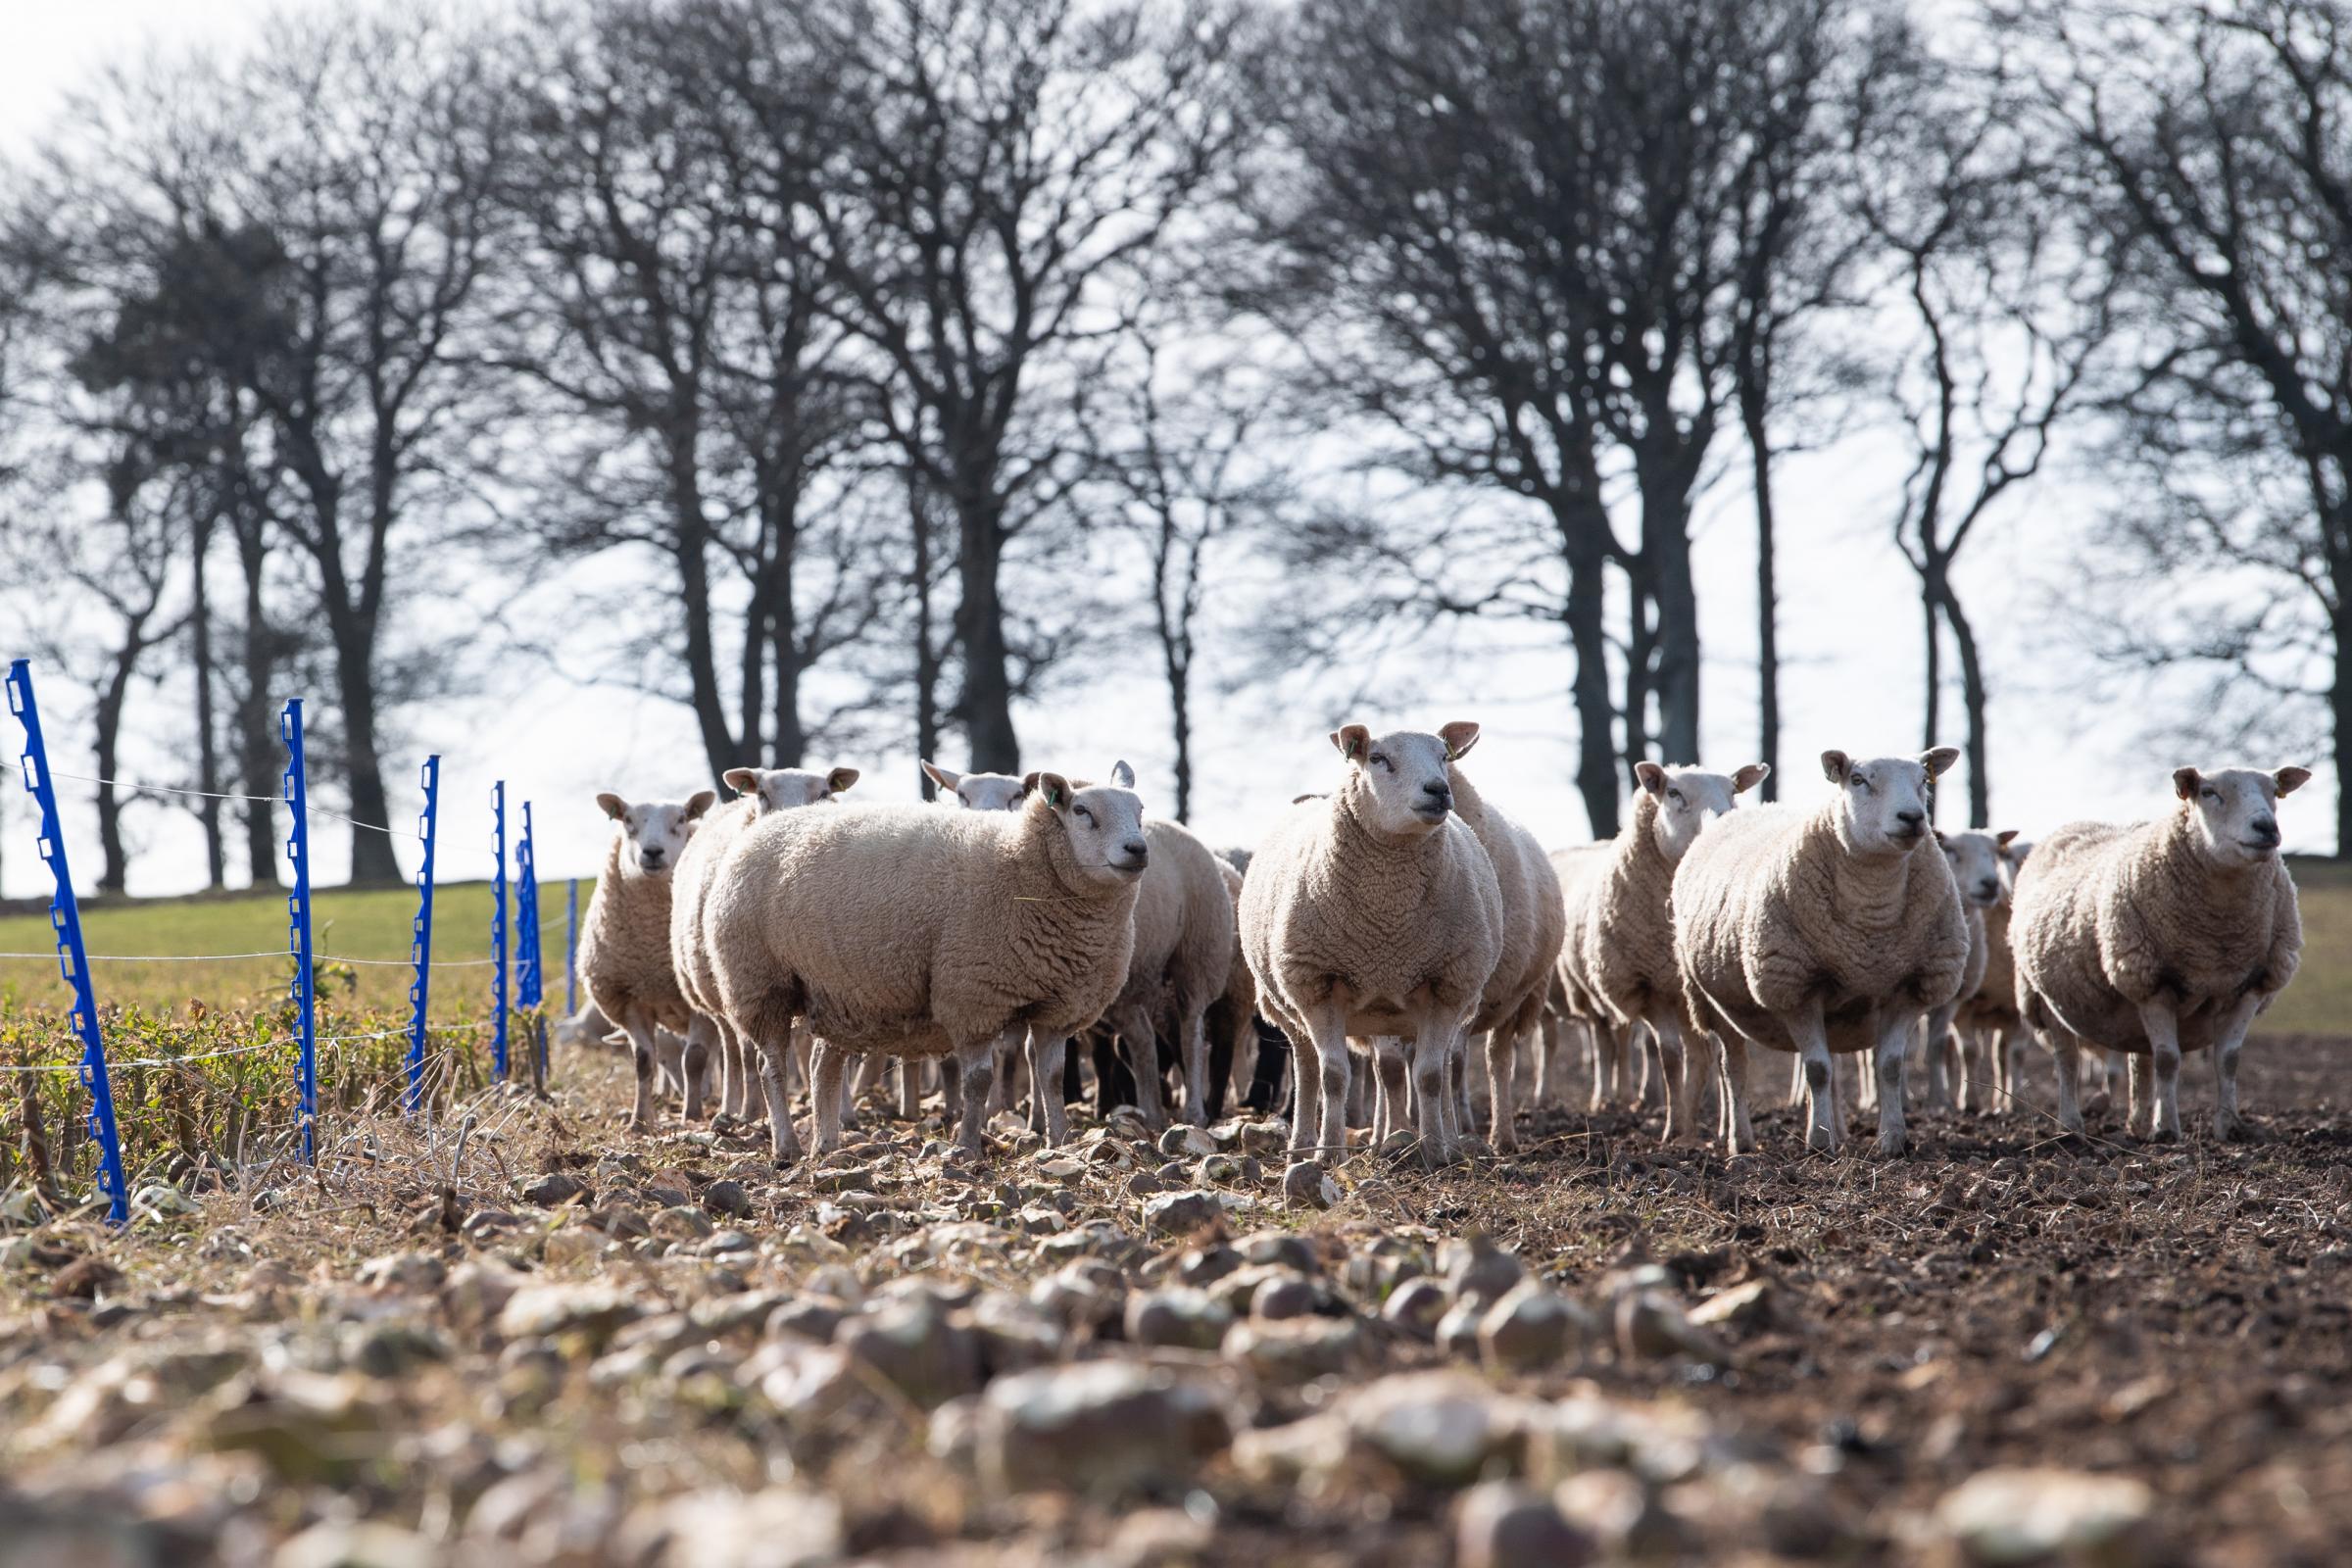 Stud ewes overwinter on swedes to keep them in condition for lambing time Ref:RH16032143 Rob Haining / The Scottish Farmer...